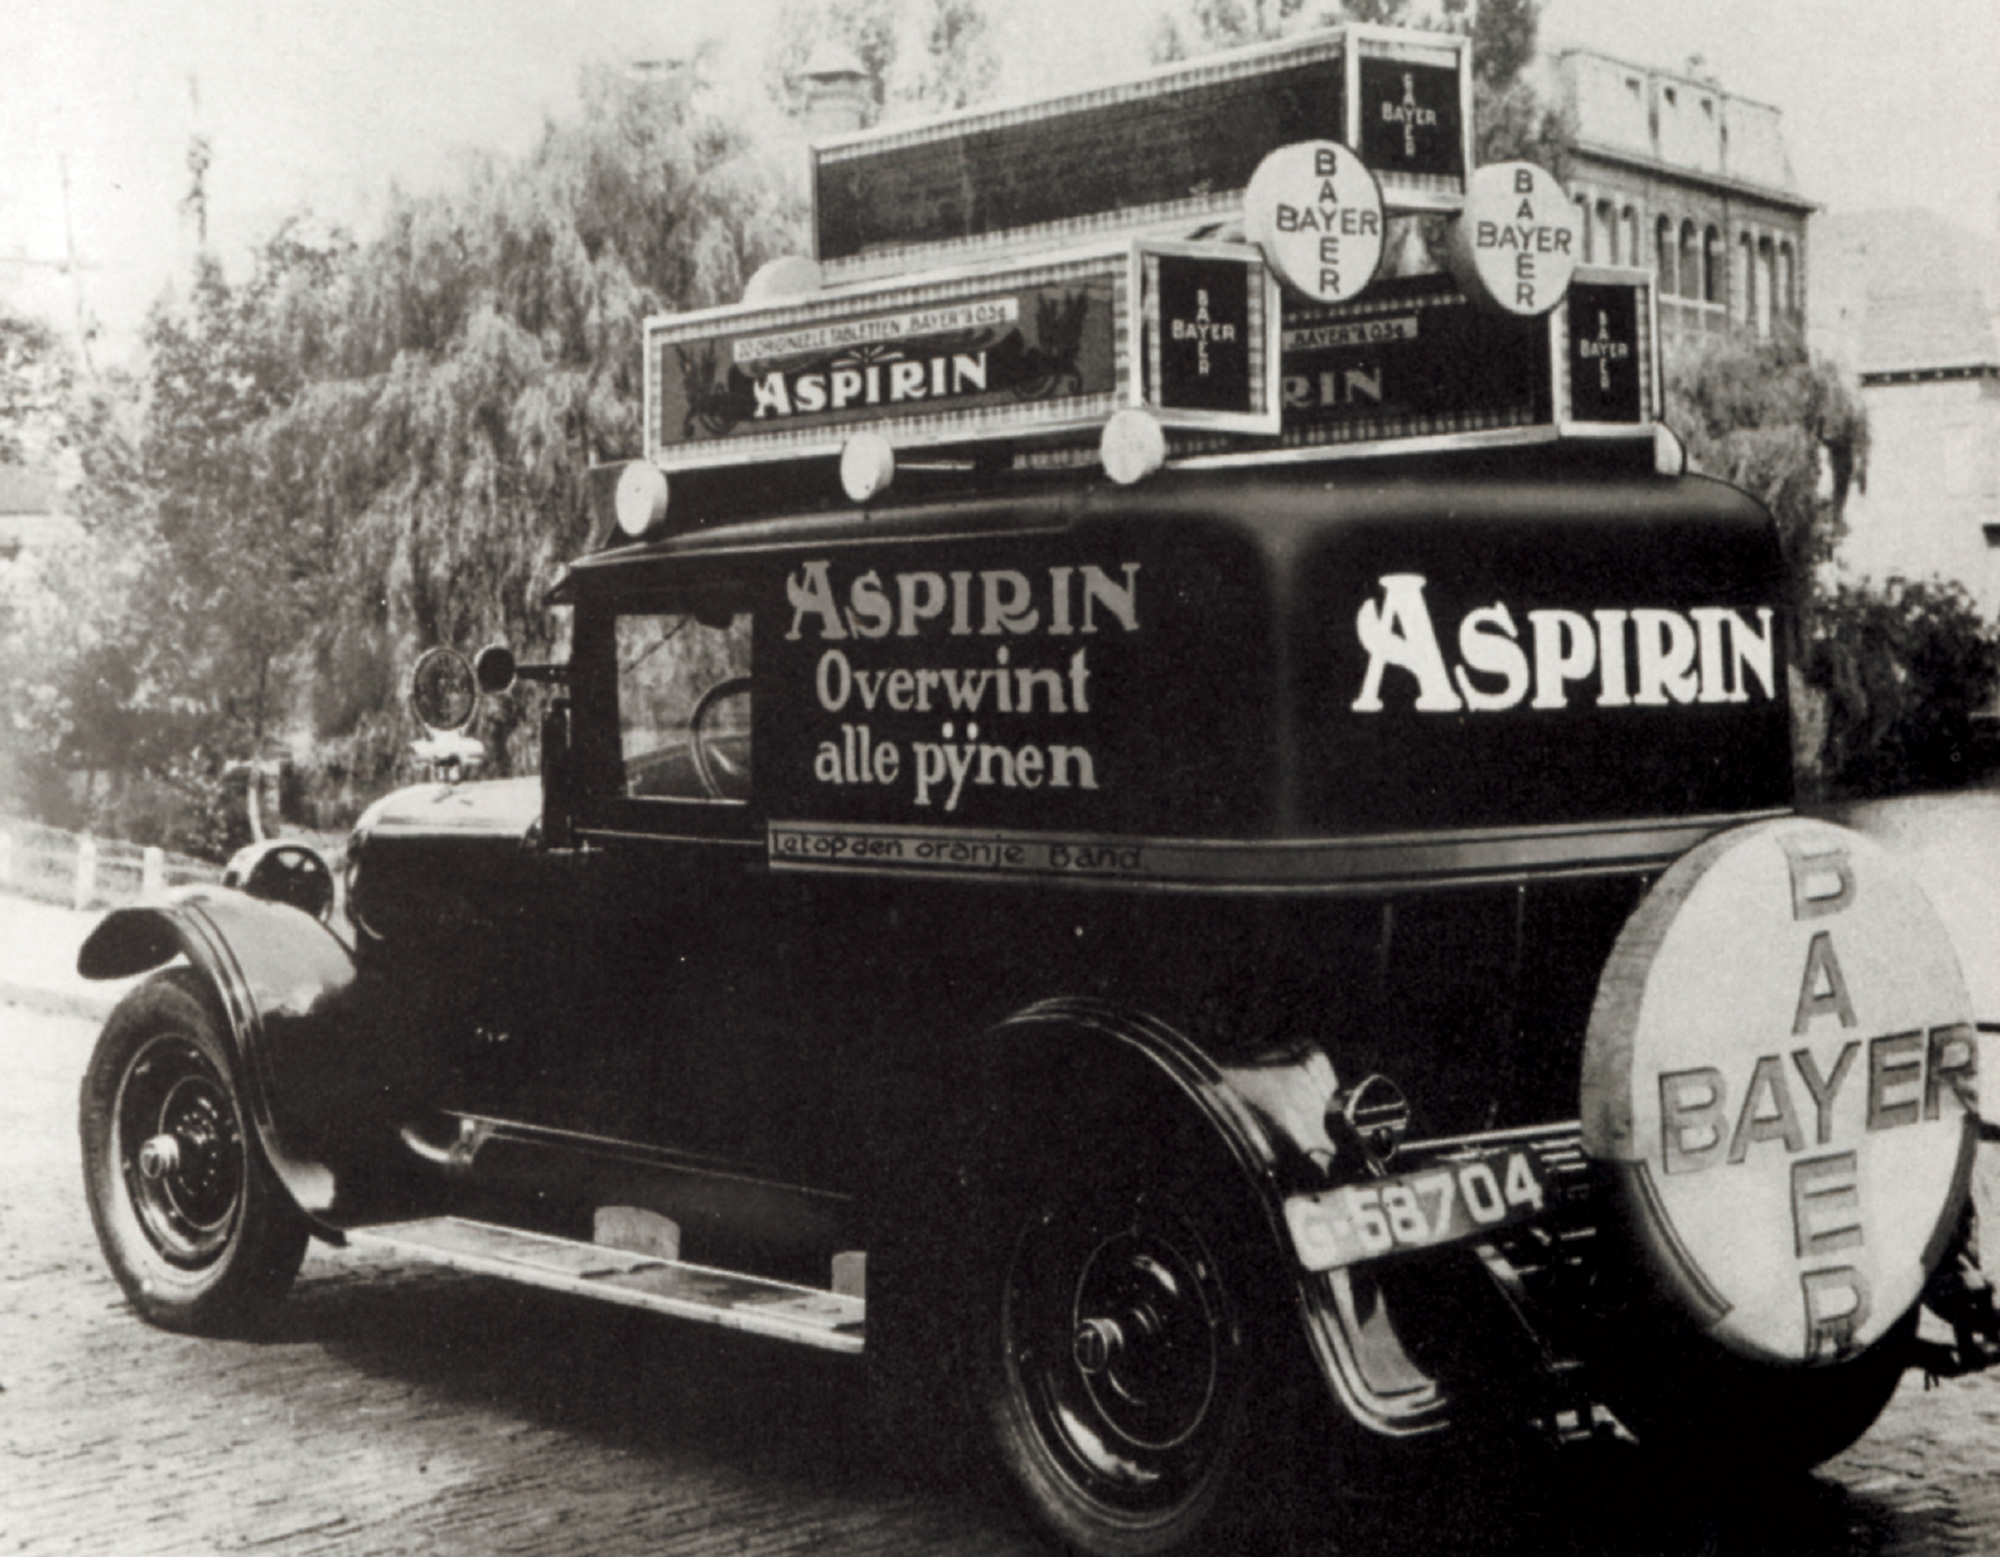 The 1920s and 1930s witnessed the explosion of aspirin advertising. Aspirin advertising trucks became a familiar sight on European streets.